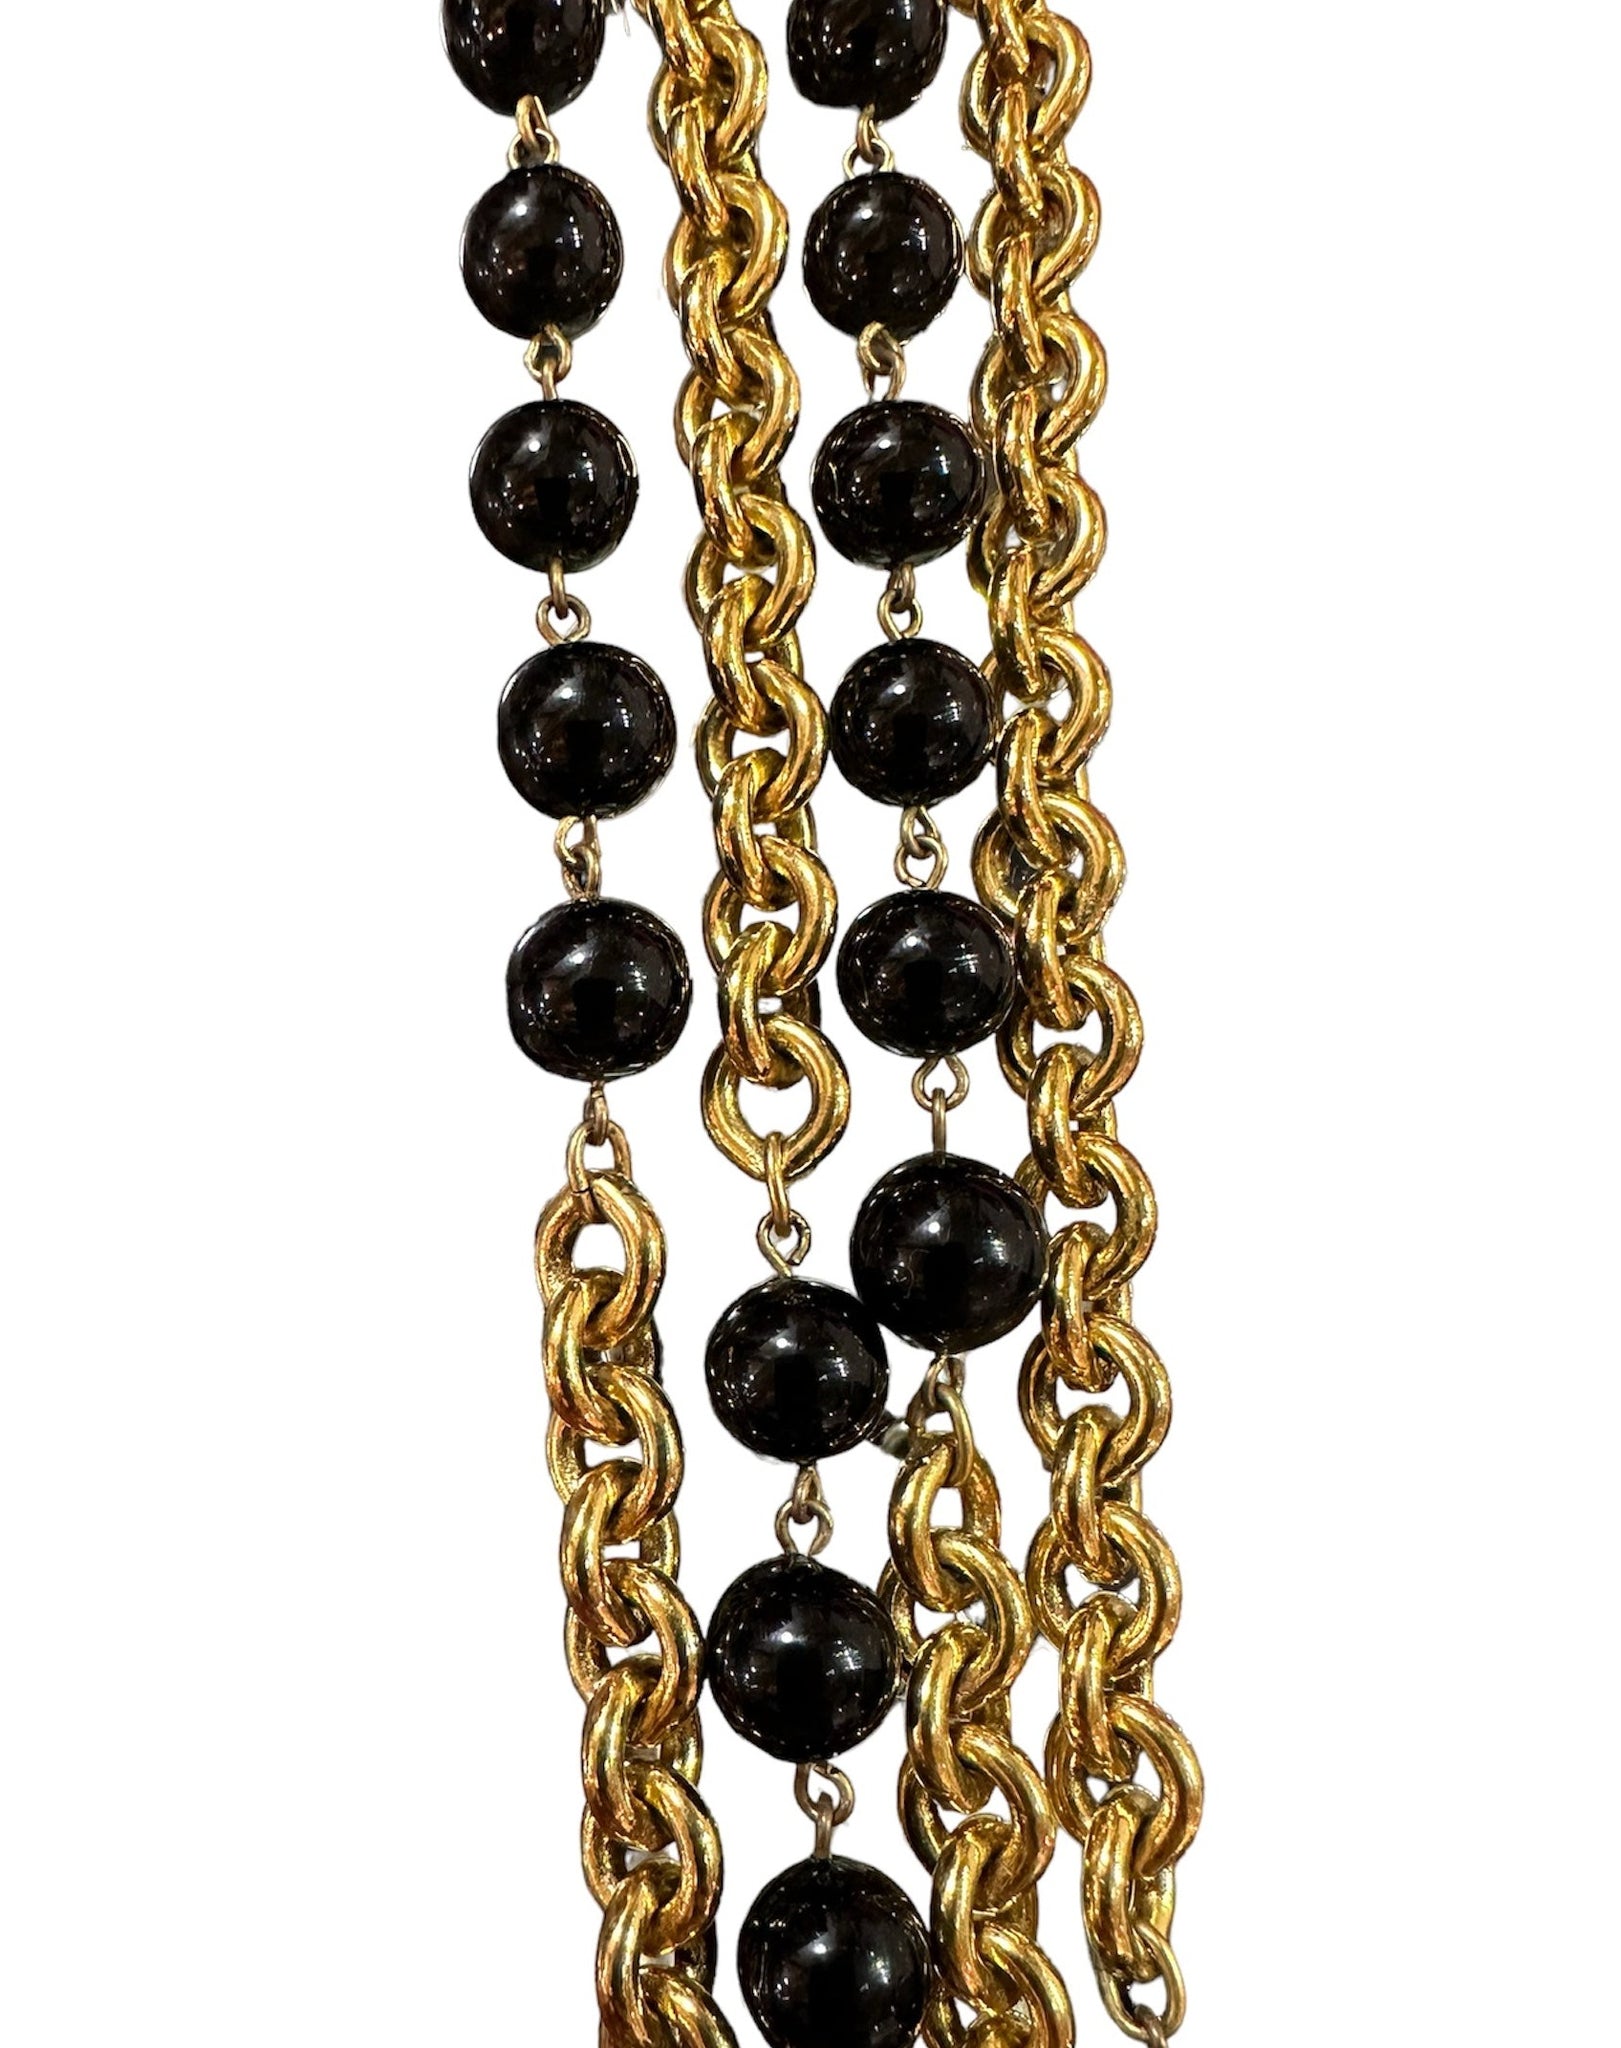  Chanel Gold 1984 Toned Black Bead Two Strand Necklace DETAIL 2 of 3